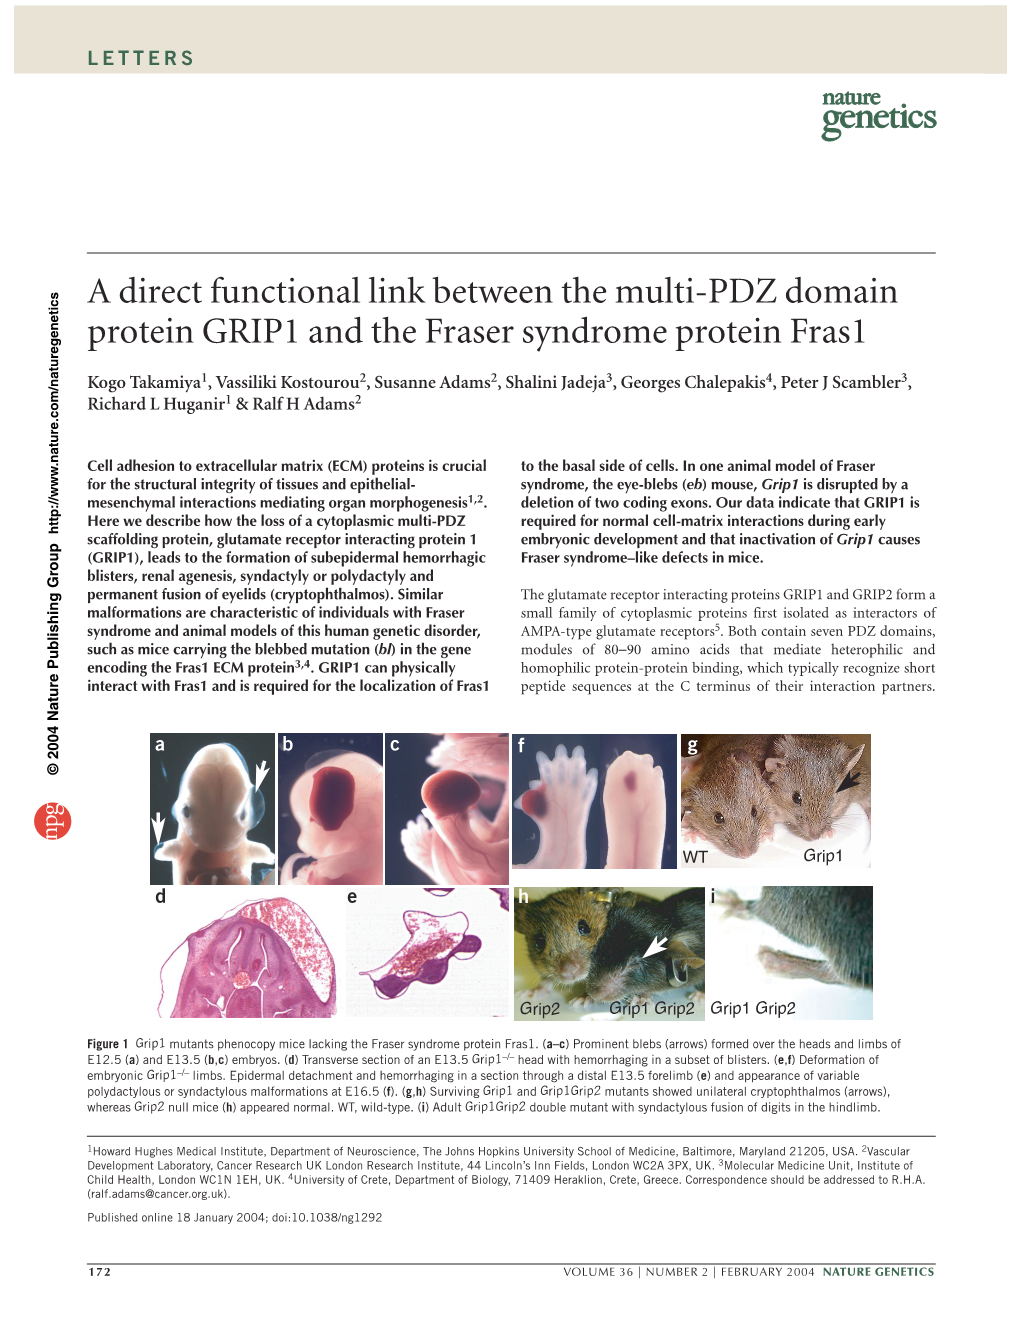 A Direct Functional Link Between the Multi-PDZ Domain Protein GRIP1 and the Fraser Syndrome Protein Fras1